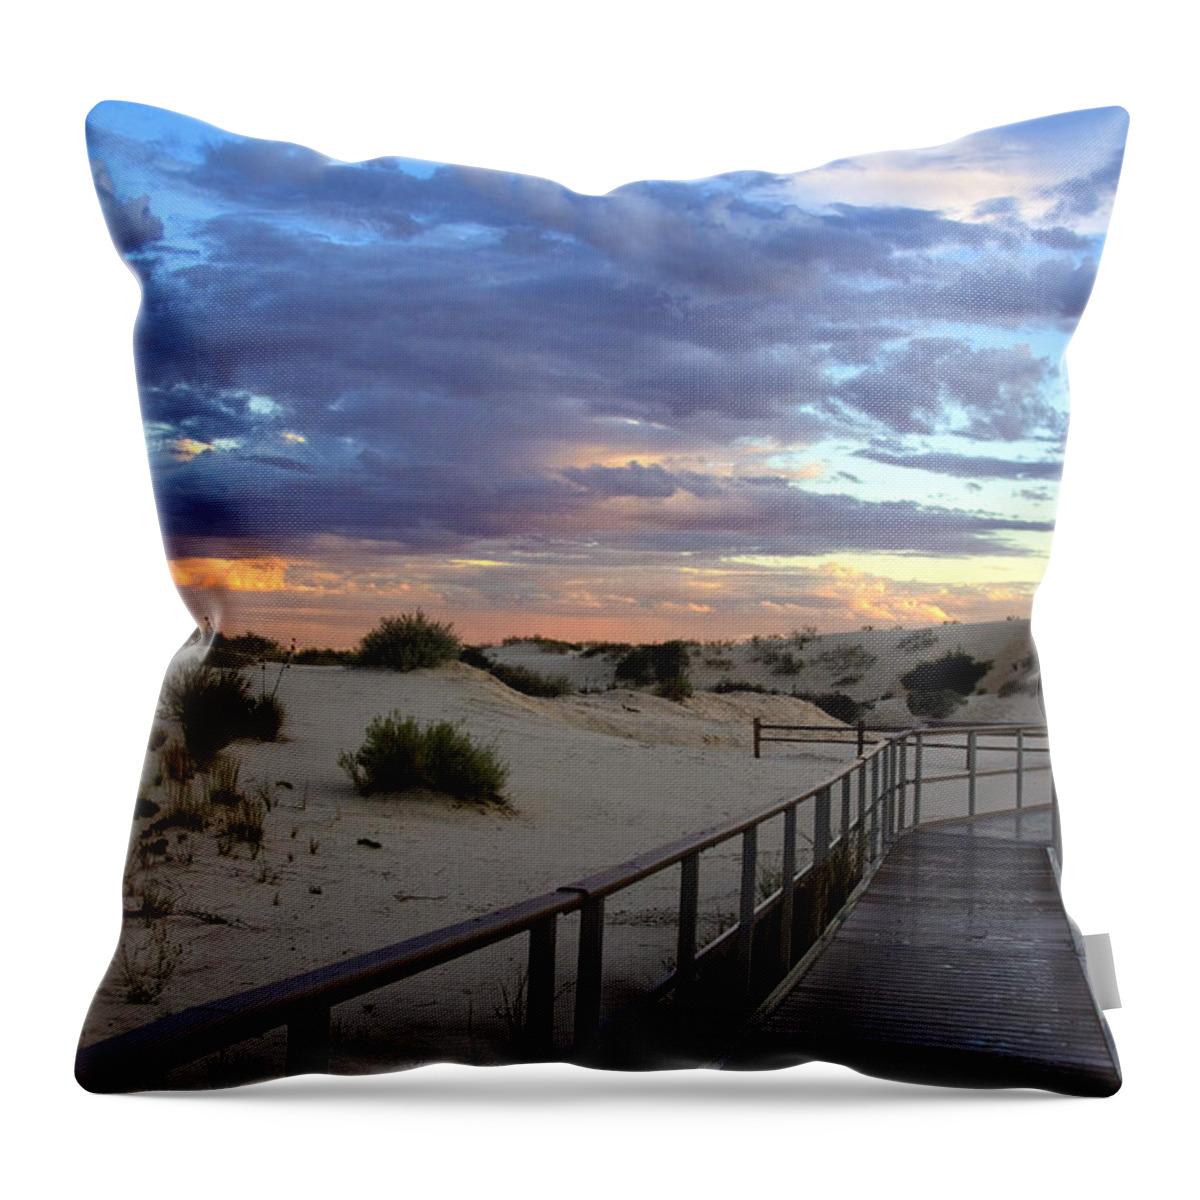 White Sands Throw Pillow featuring the photograph White Sands Boardwalk at Sunset by Diana Powell